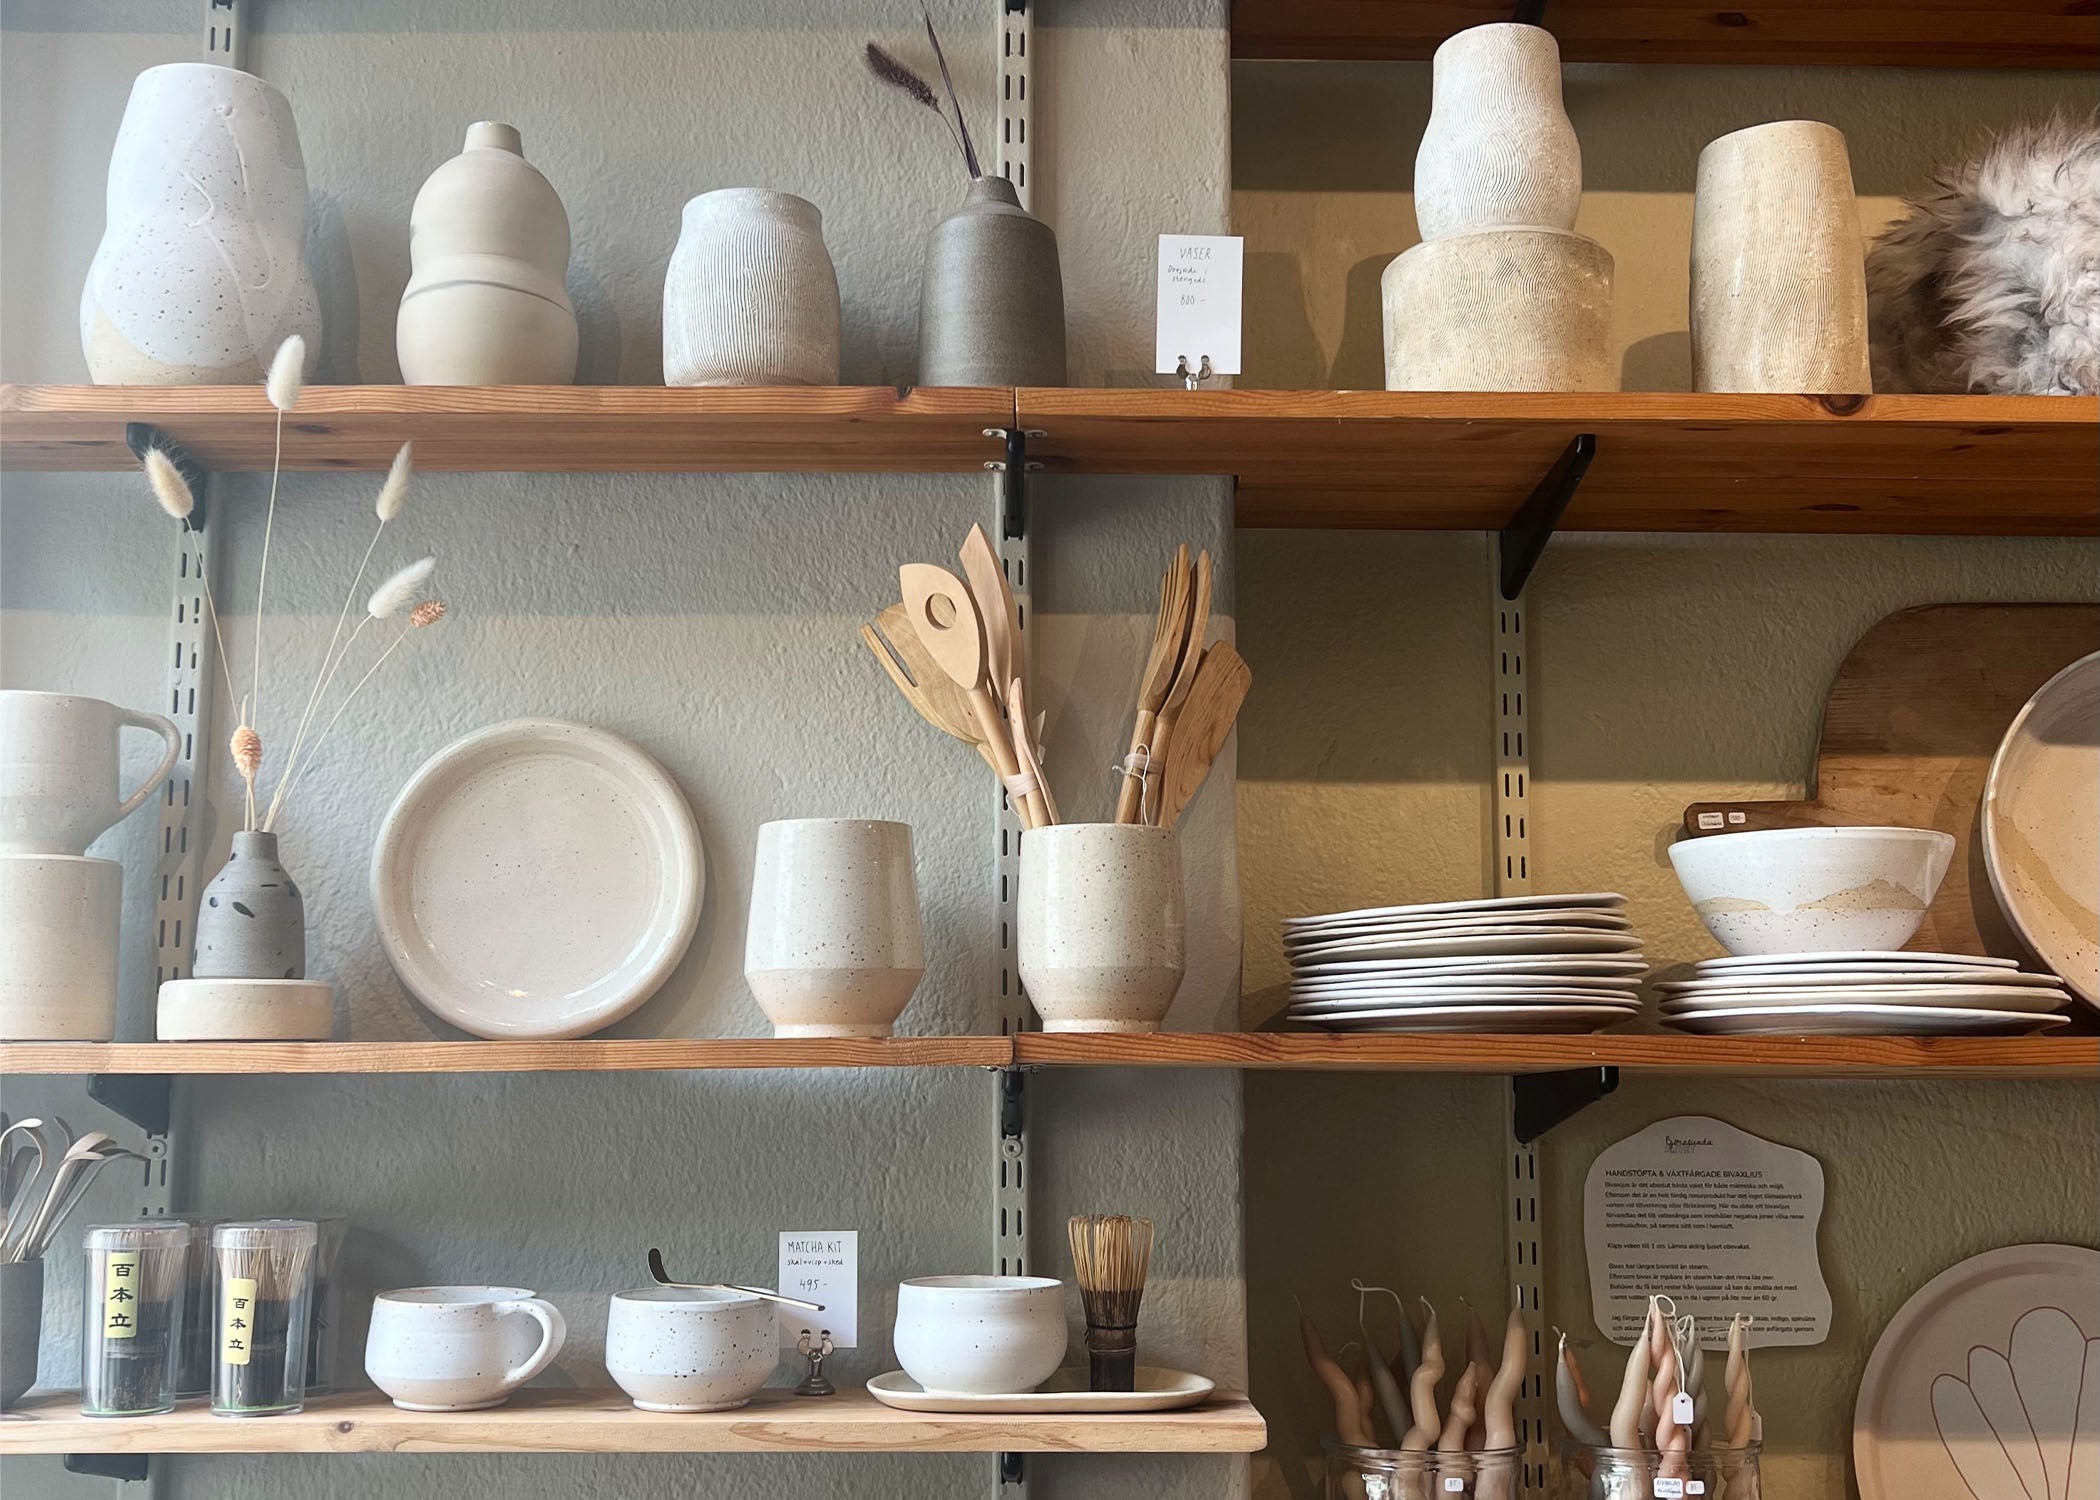 Shelves with ceramics by Erika Petersdotter found in her storefront in Stockholm, Sweden.